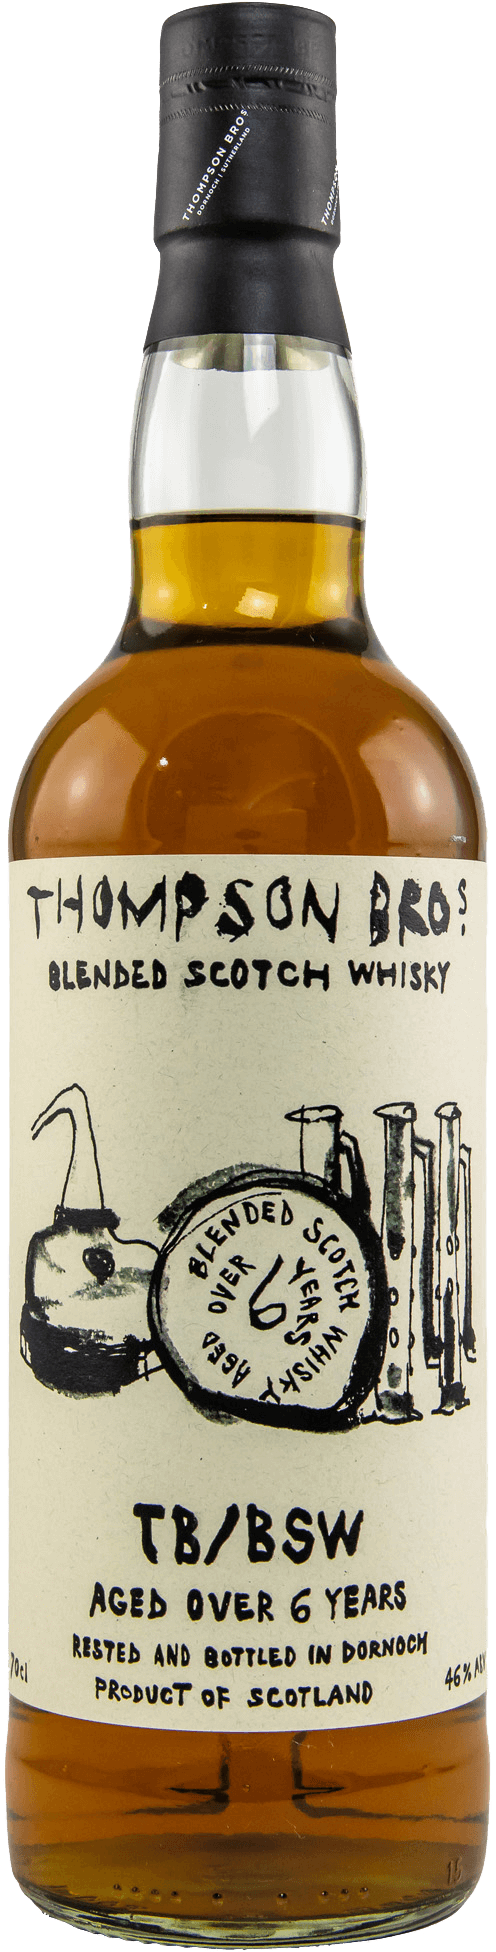 Thompson Bros over 6 Jahre Blended Scotch Whisky 46%